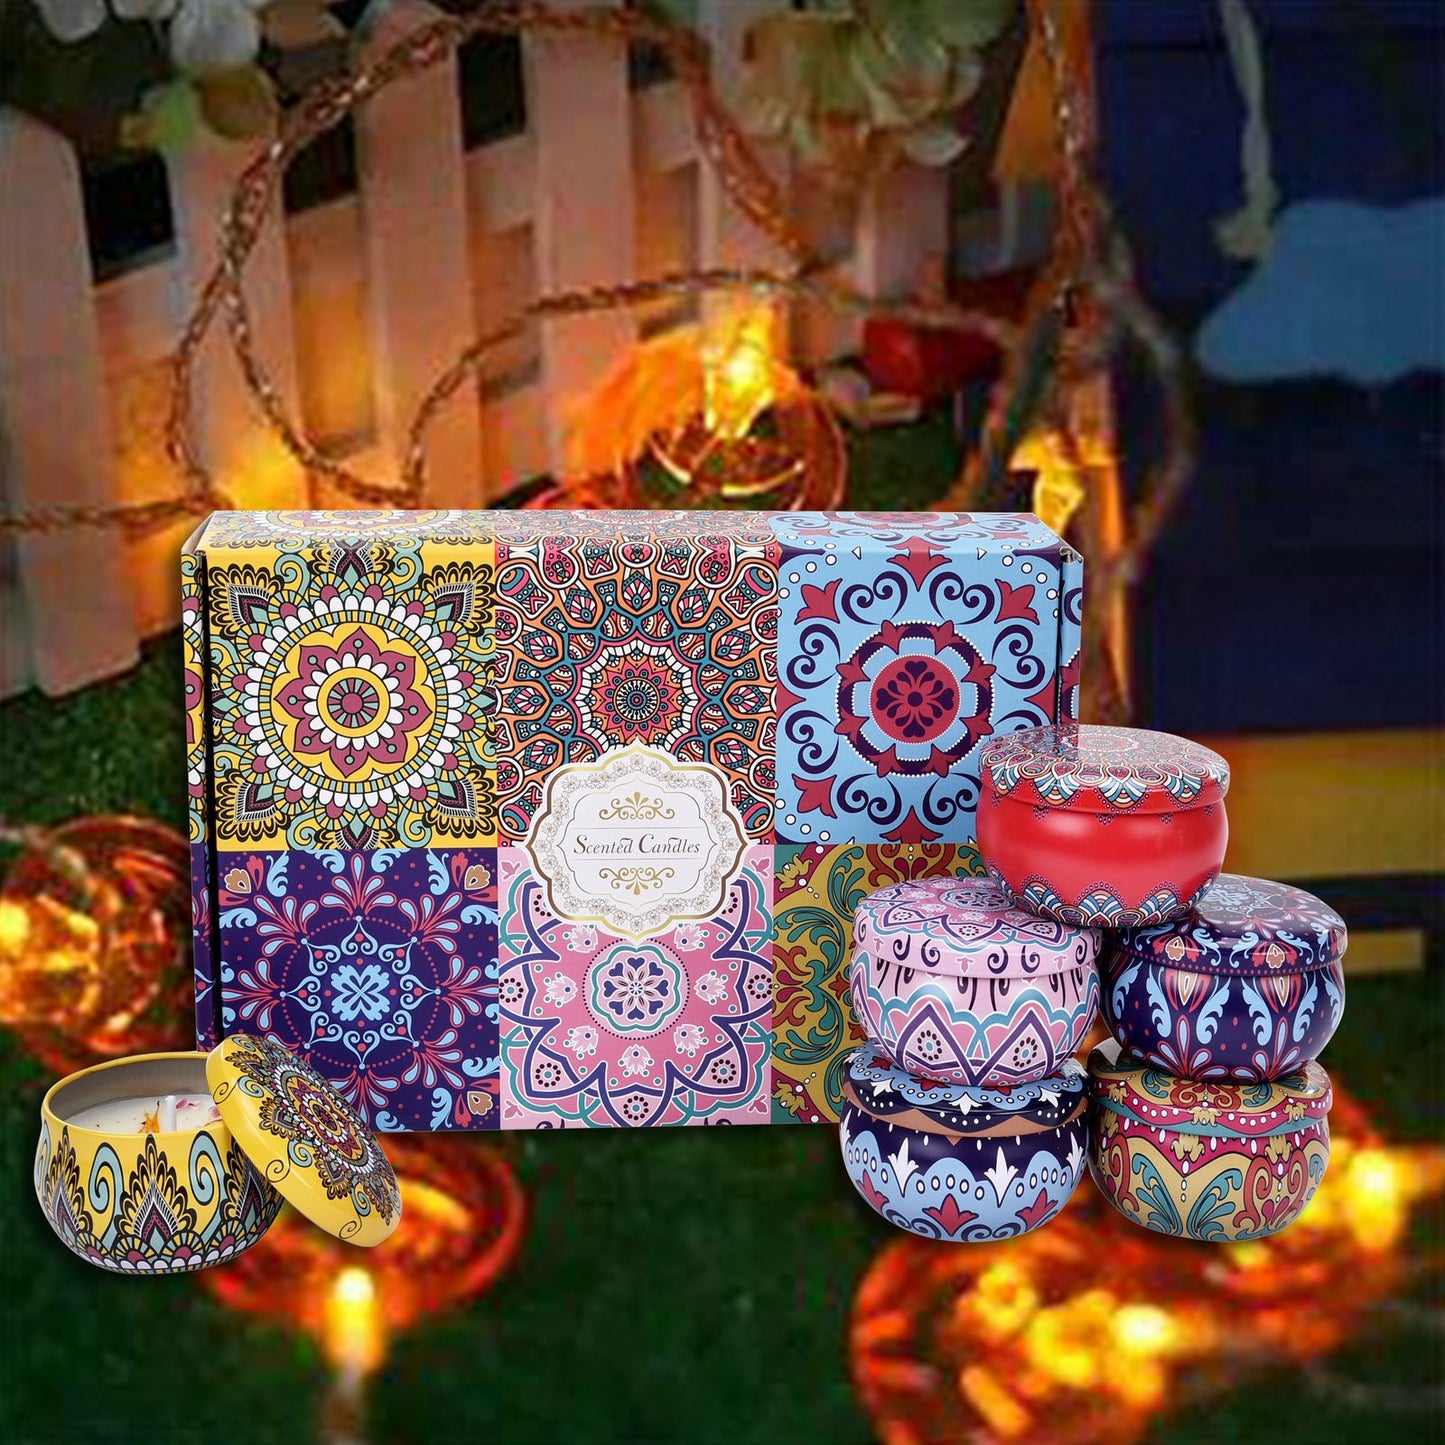 Halloween Scented Candle Gift Set: Scented Candle Home 6-pack